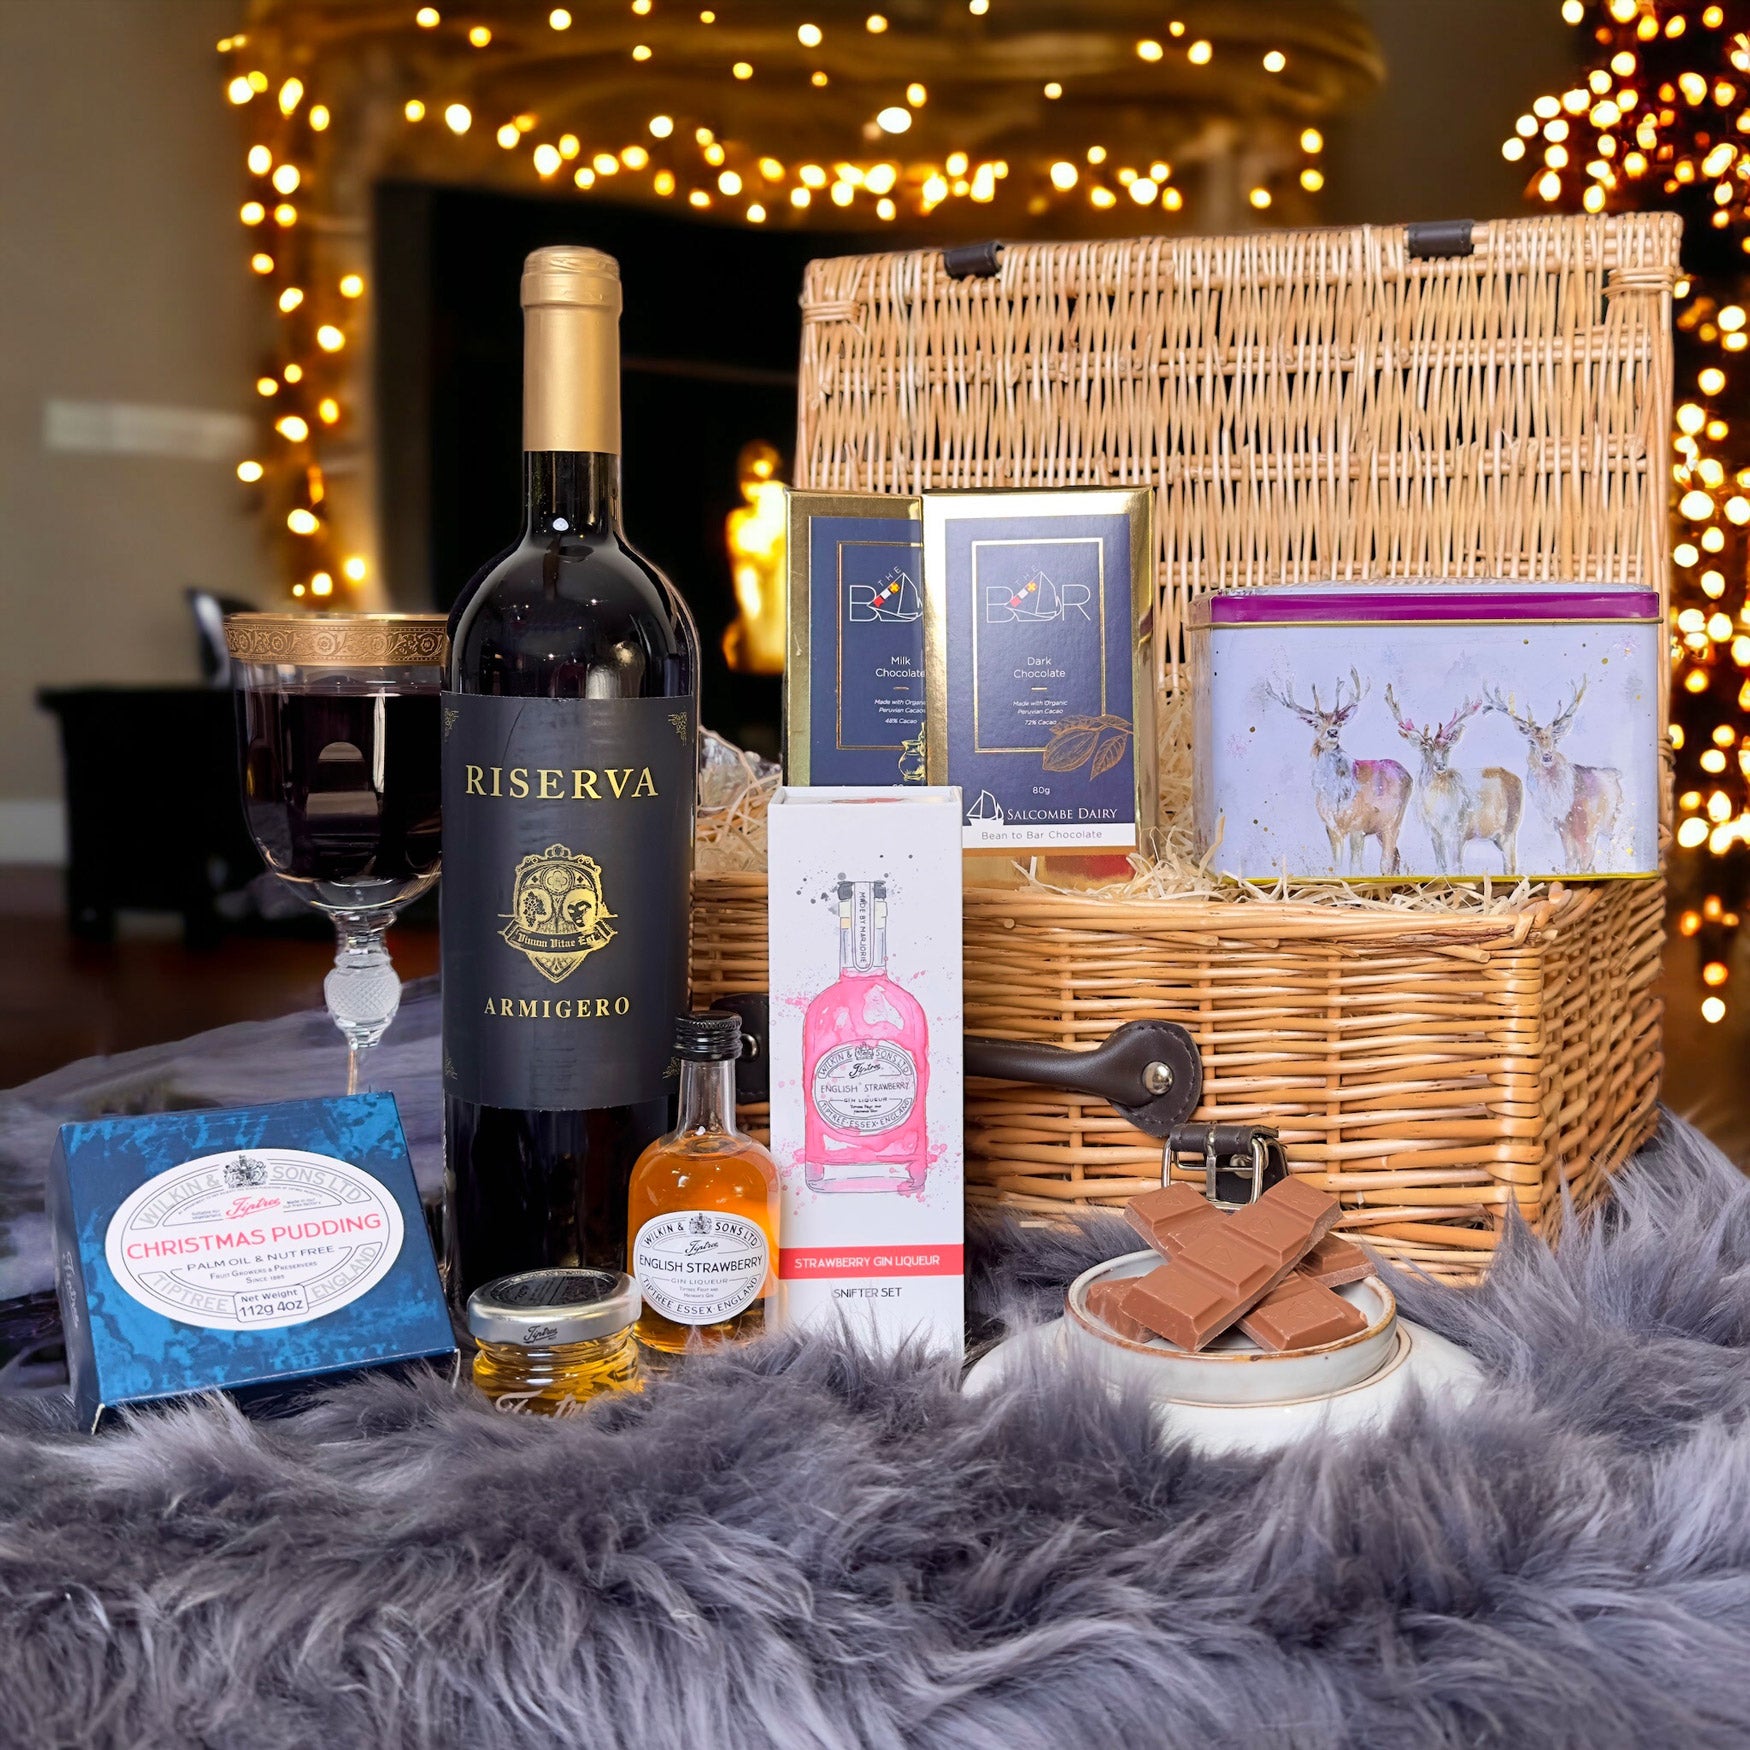 The Merry and Bright Christmas Wine Gift Hamper